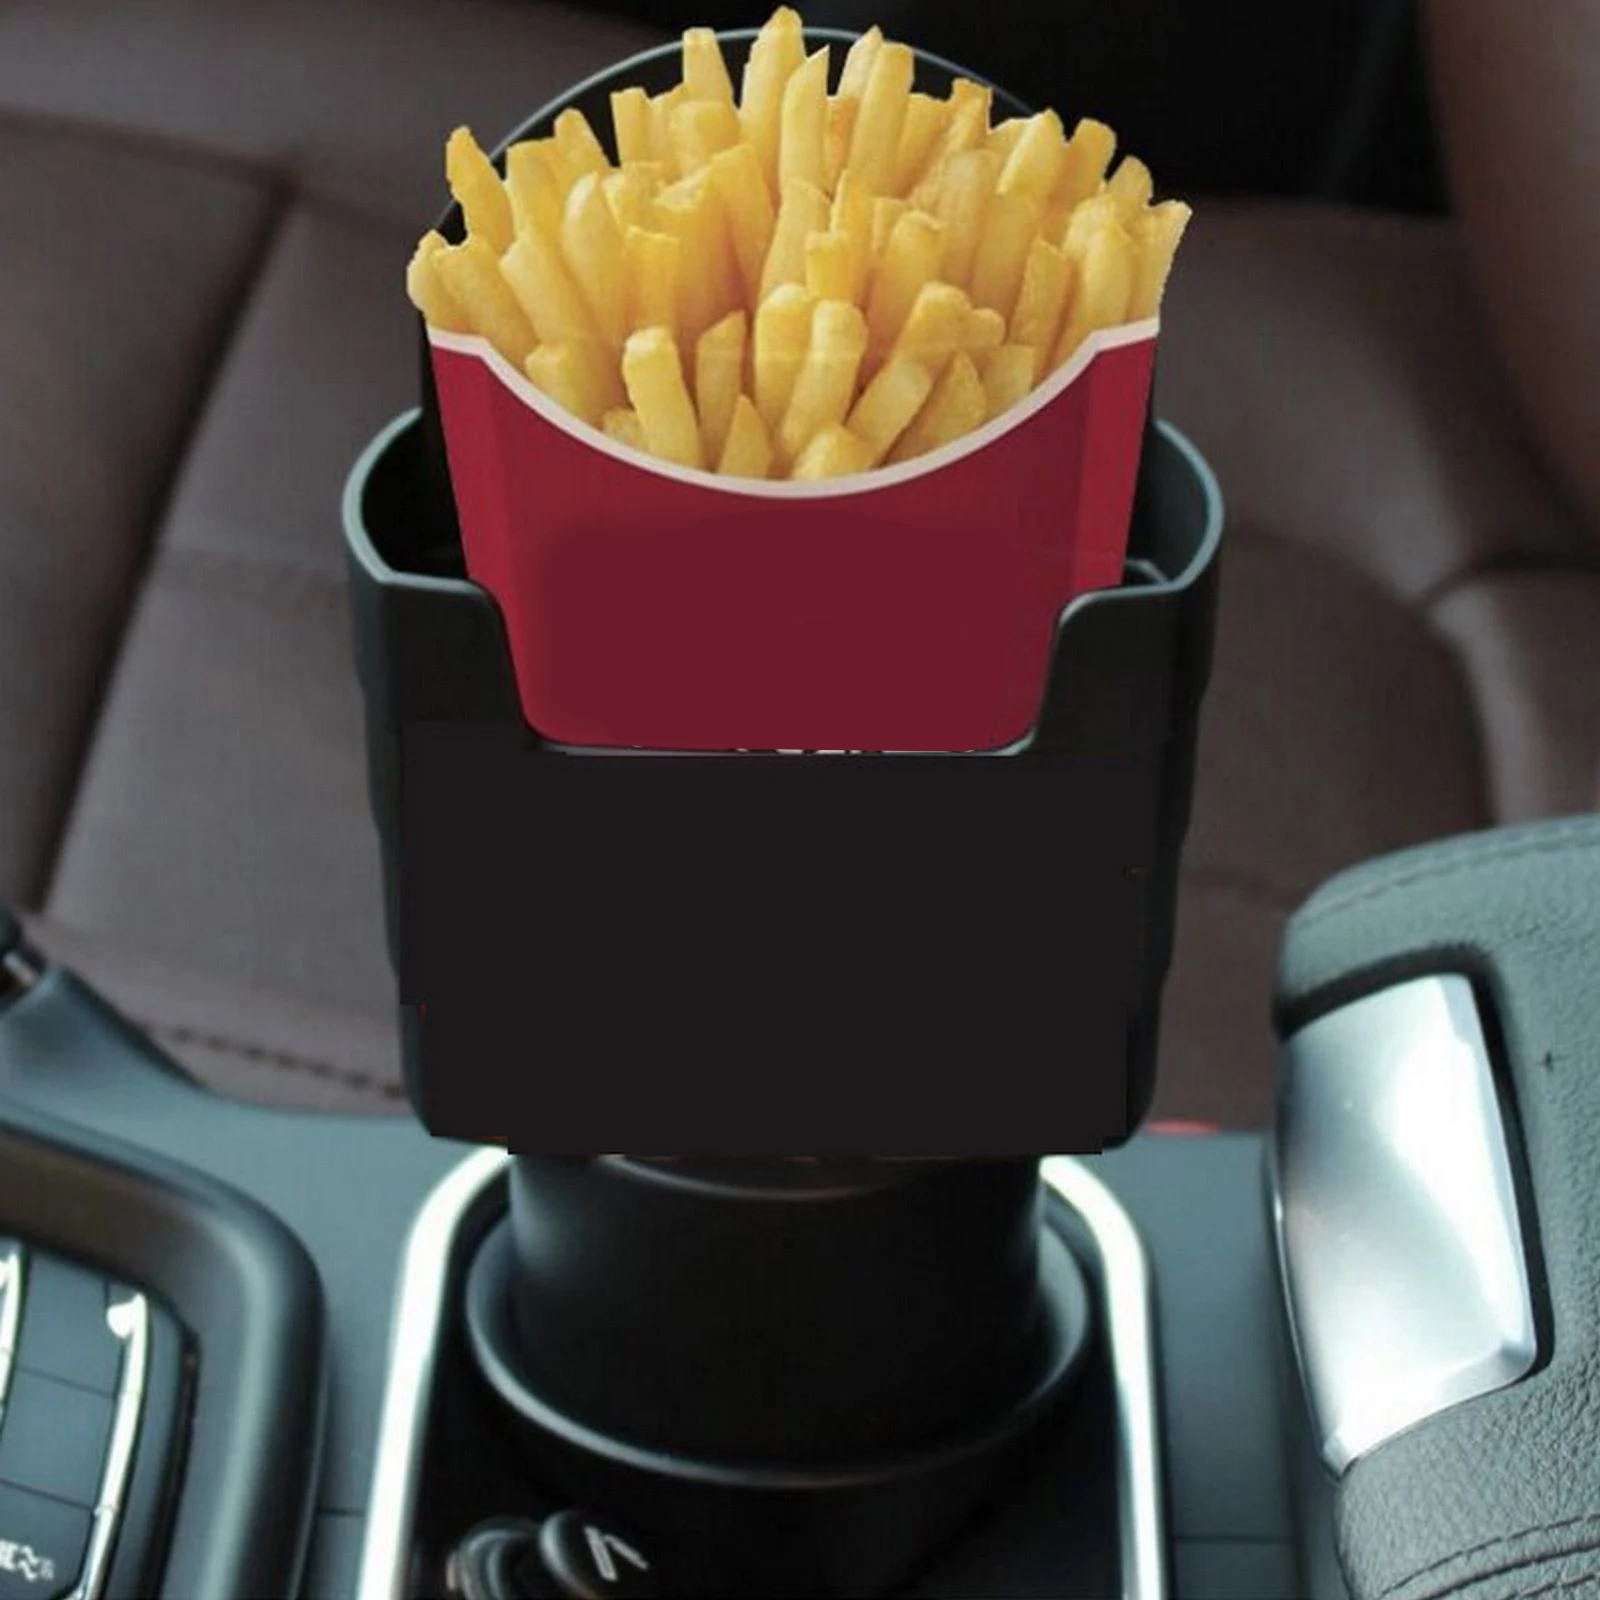 Perfect White Elephant Idea Stocking Stuffer or Holiday Present Fries on The Fly Universal Car French Fry Holder for Cup Holder 